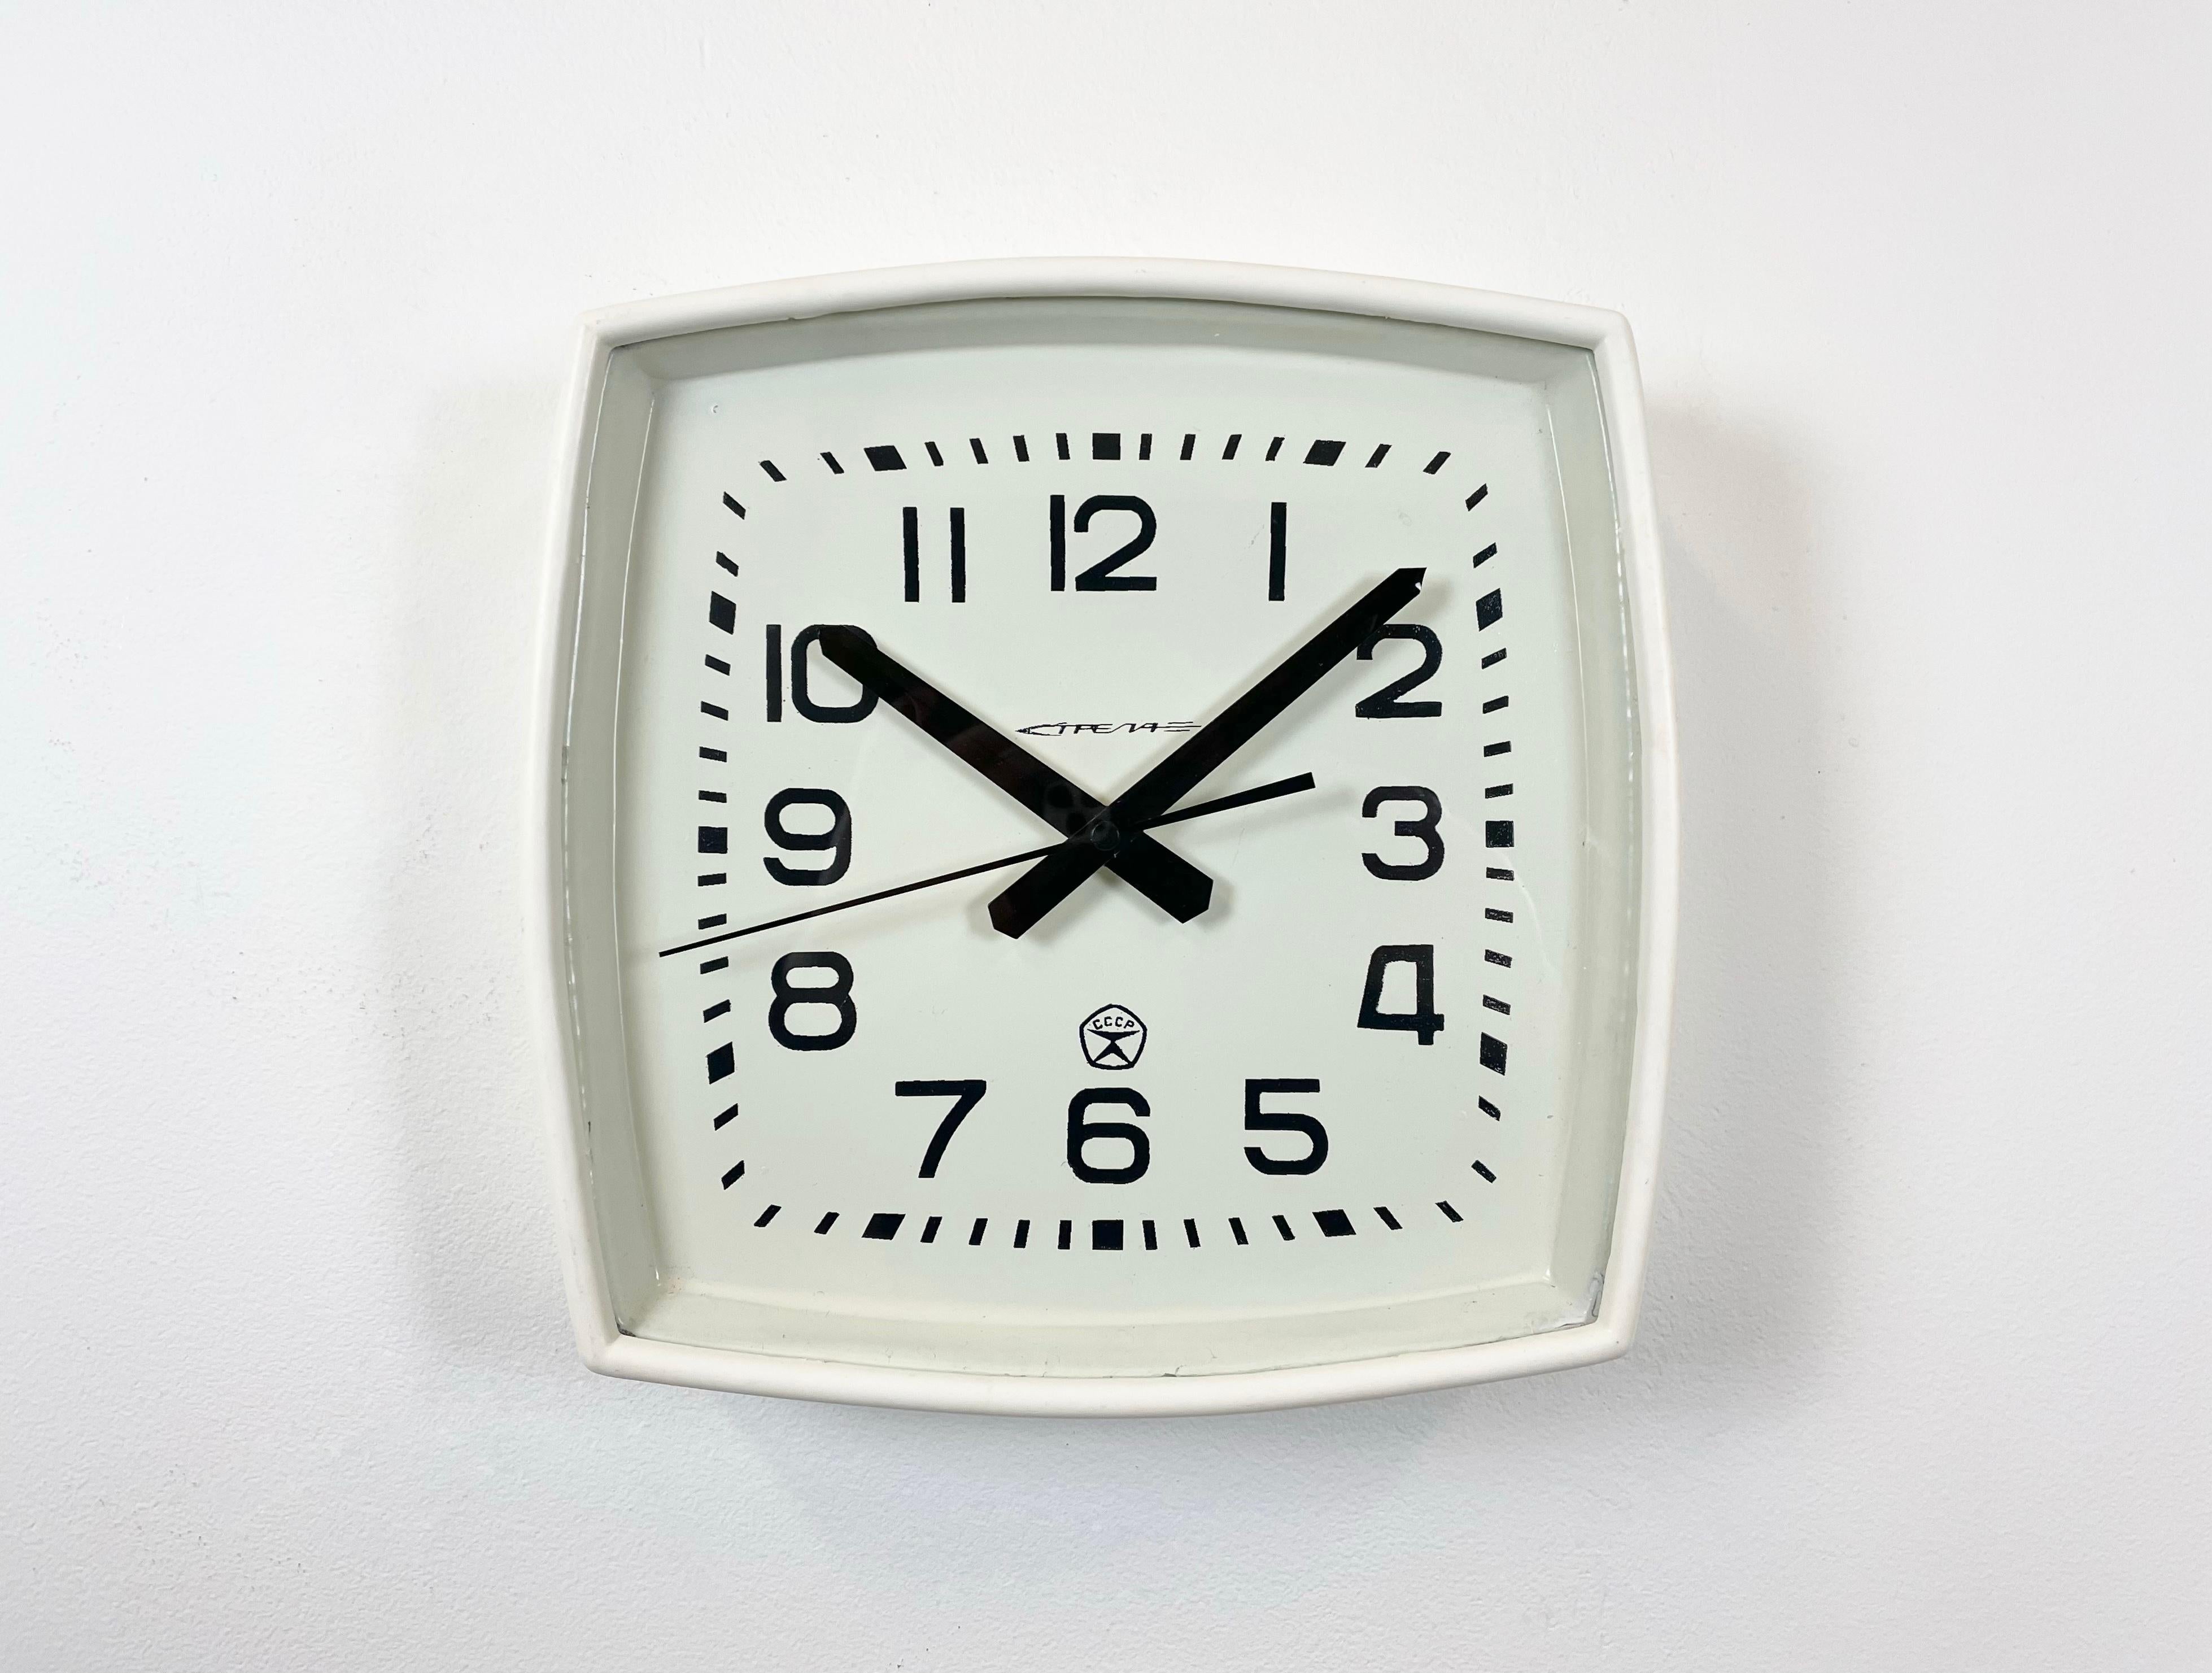 This wall clock was produced by Strela in former Soviet Union during the 1970s.It features a white bakelite frame, an iron dial and a clear glass cover. The piece has been converted into a battery-powered clockwork and requires only one AA-battery.